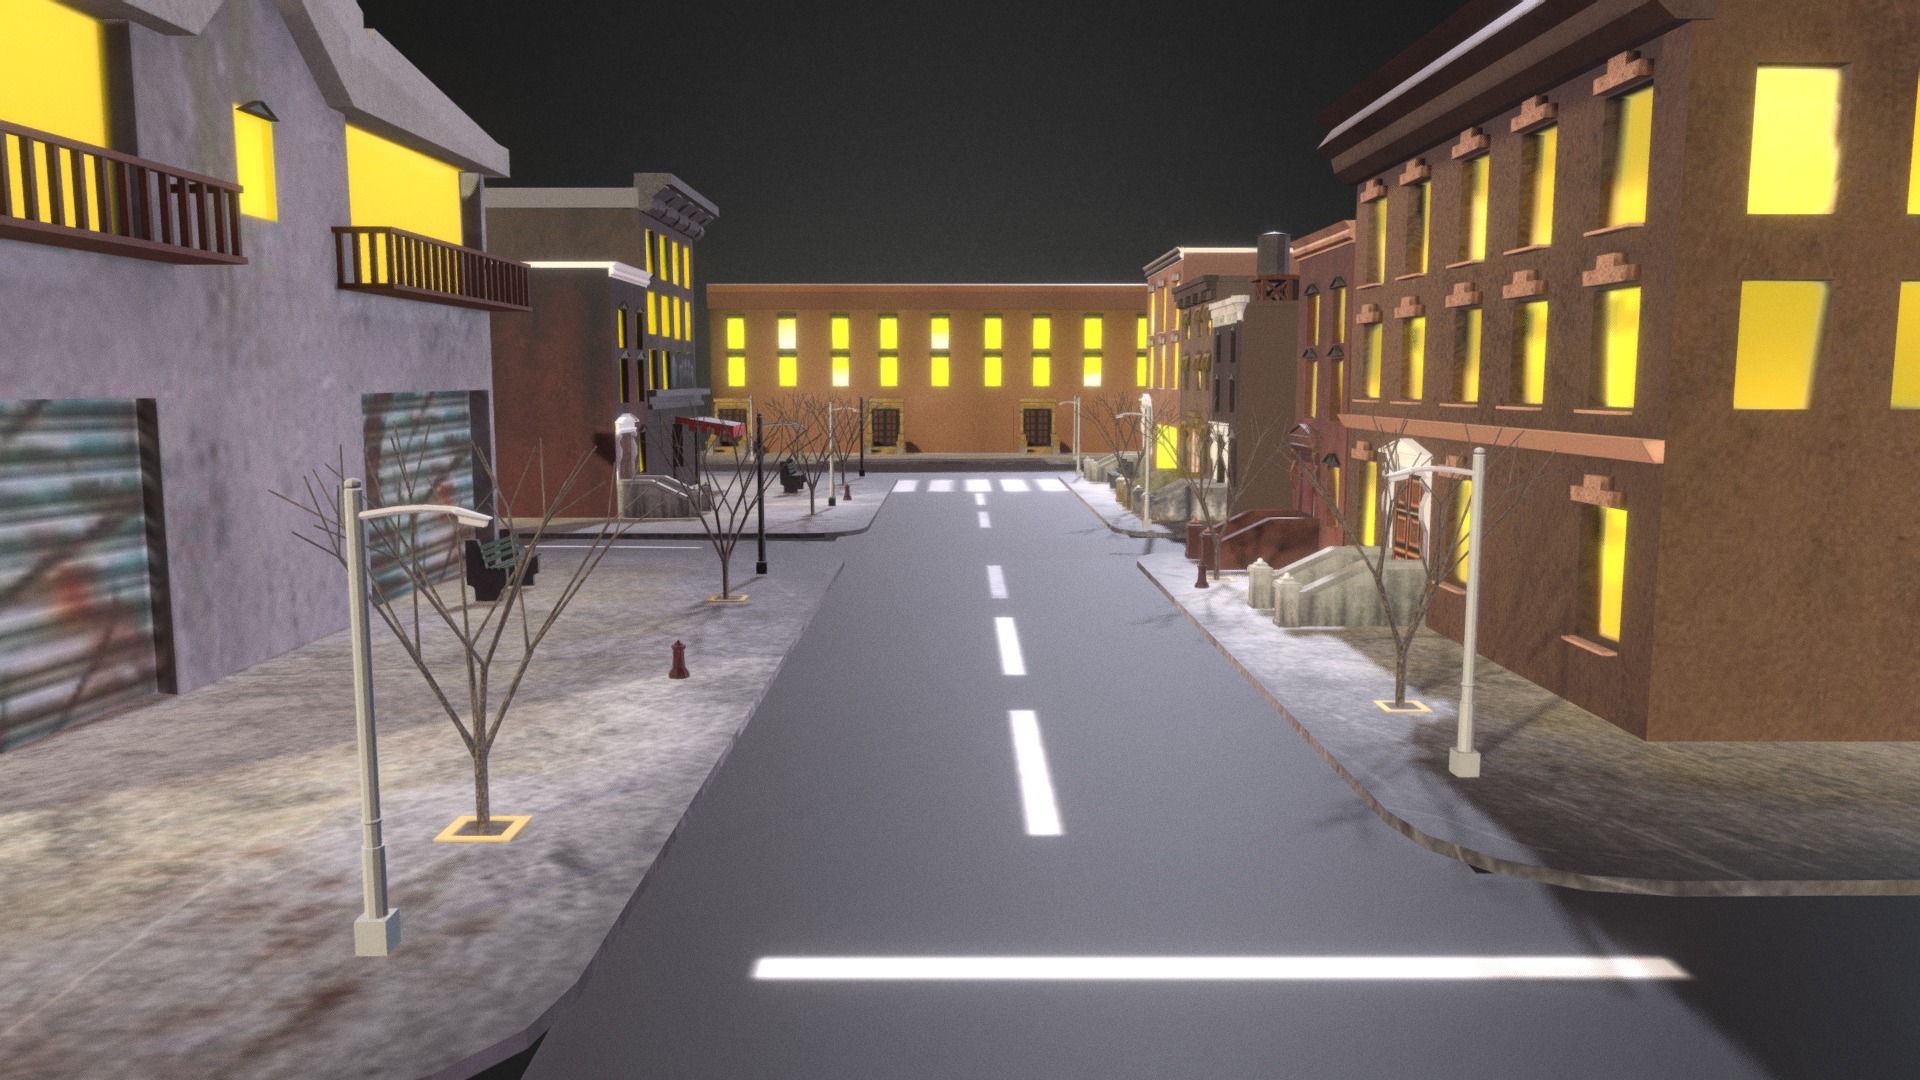 3D model Street - This is a 3D model of the Street. The 3D model is about a street with buildings on either side.